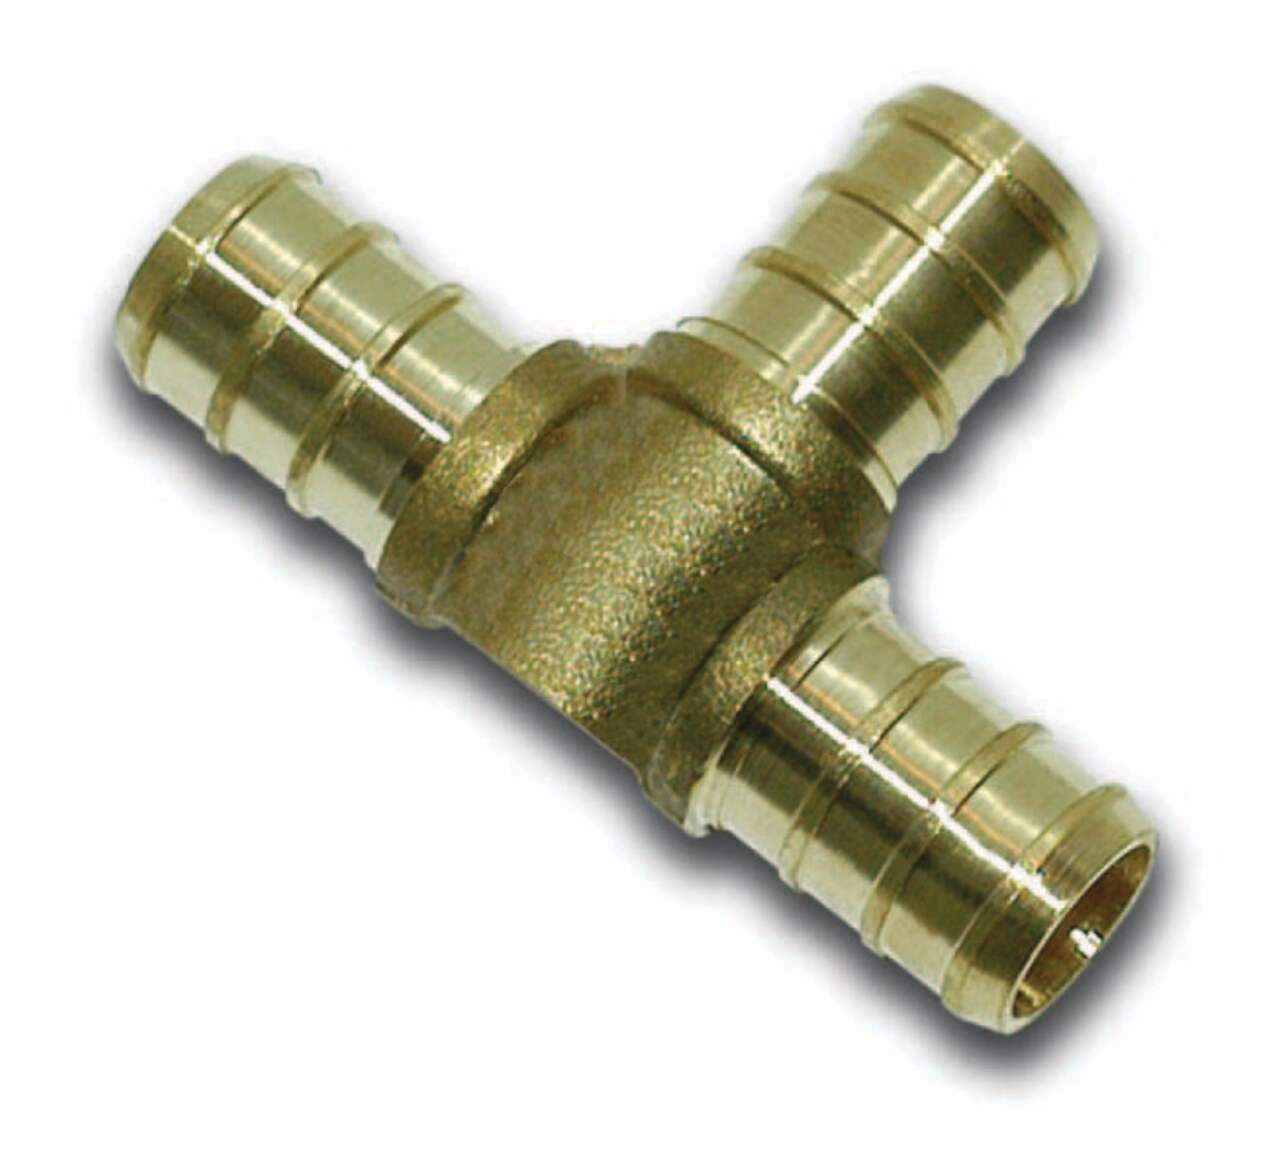 Tee PEX Pipe, Fittings & Specialty Tools at